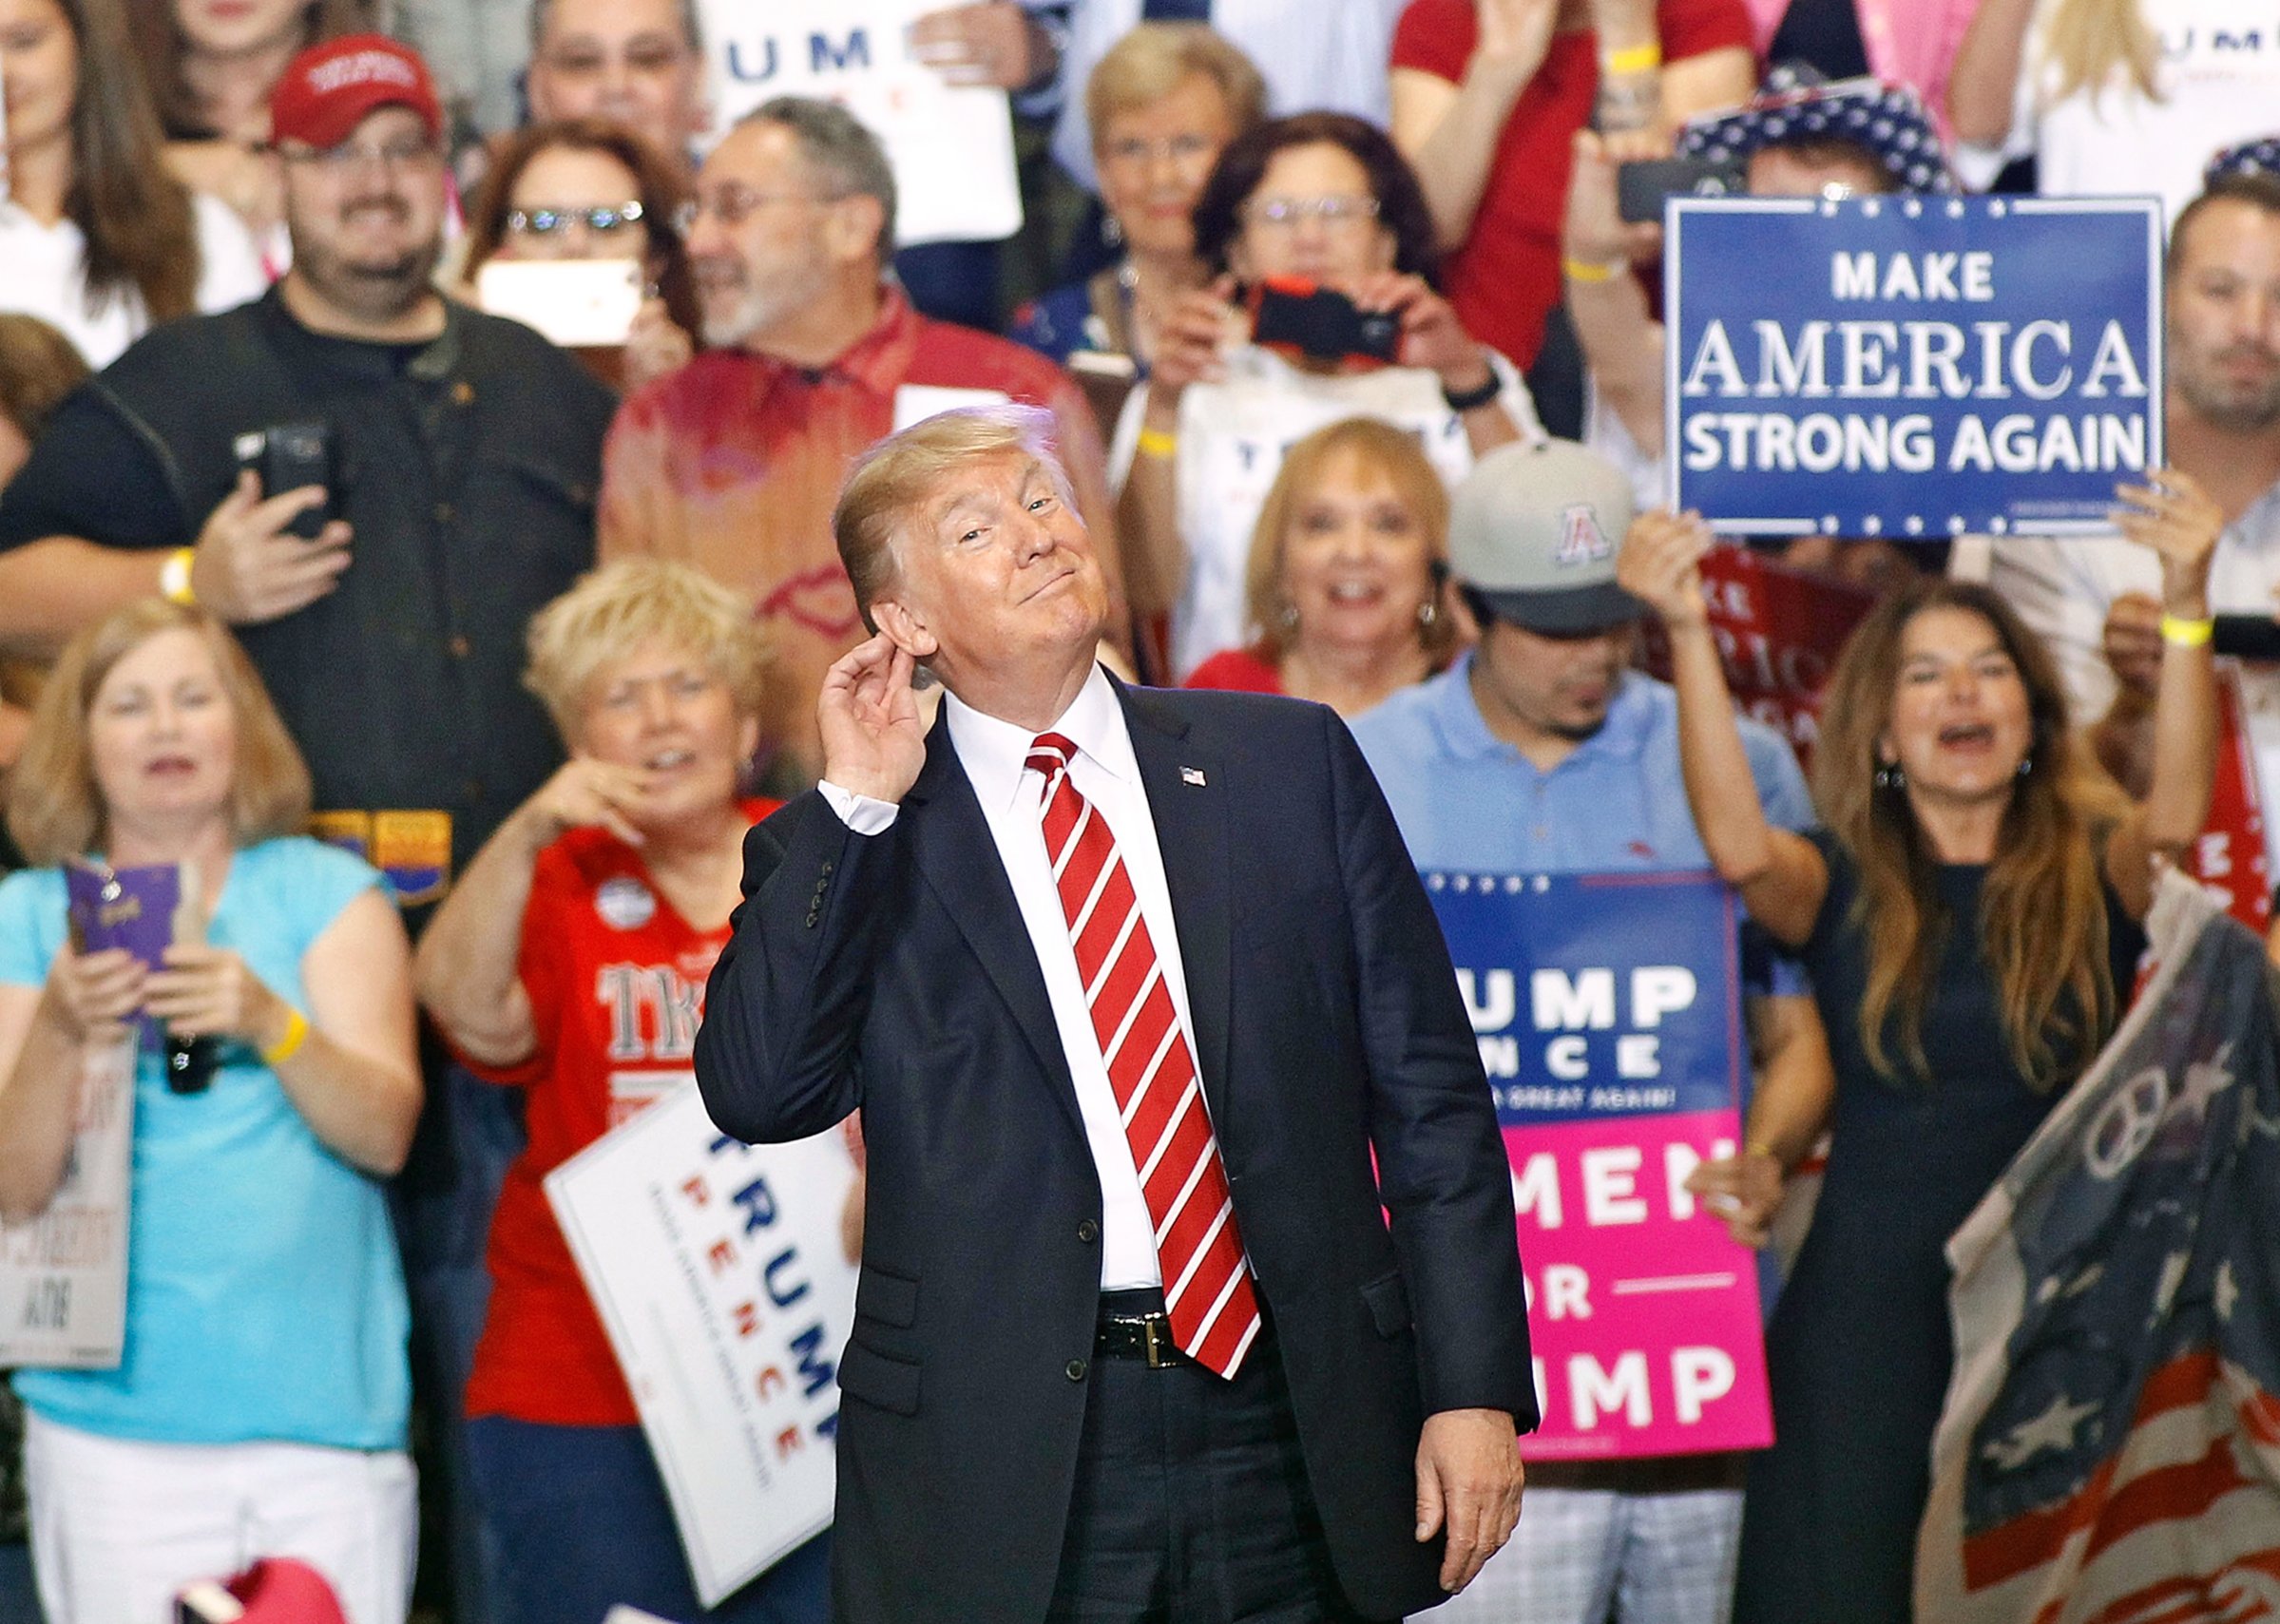 The President attacked the press and fellow Republicans at a raucous Aug. 22 event in Phoenix